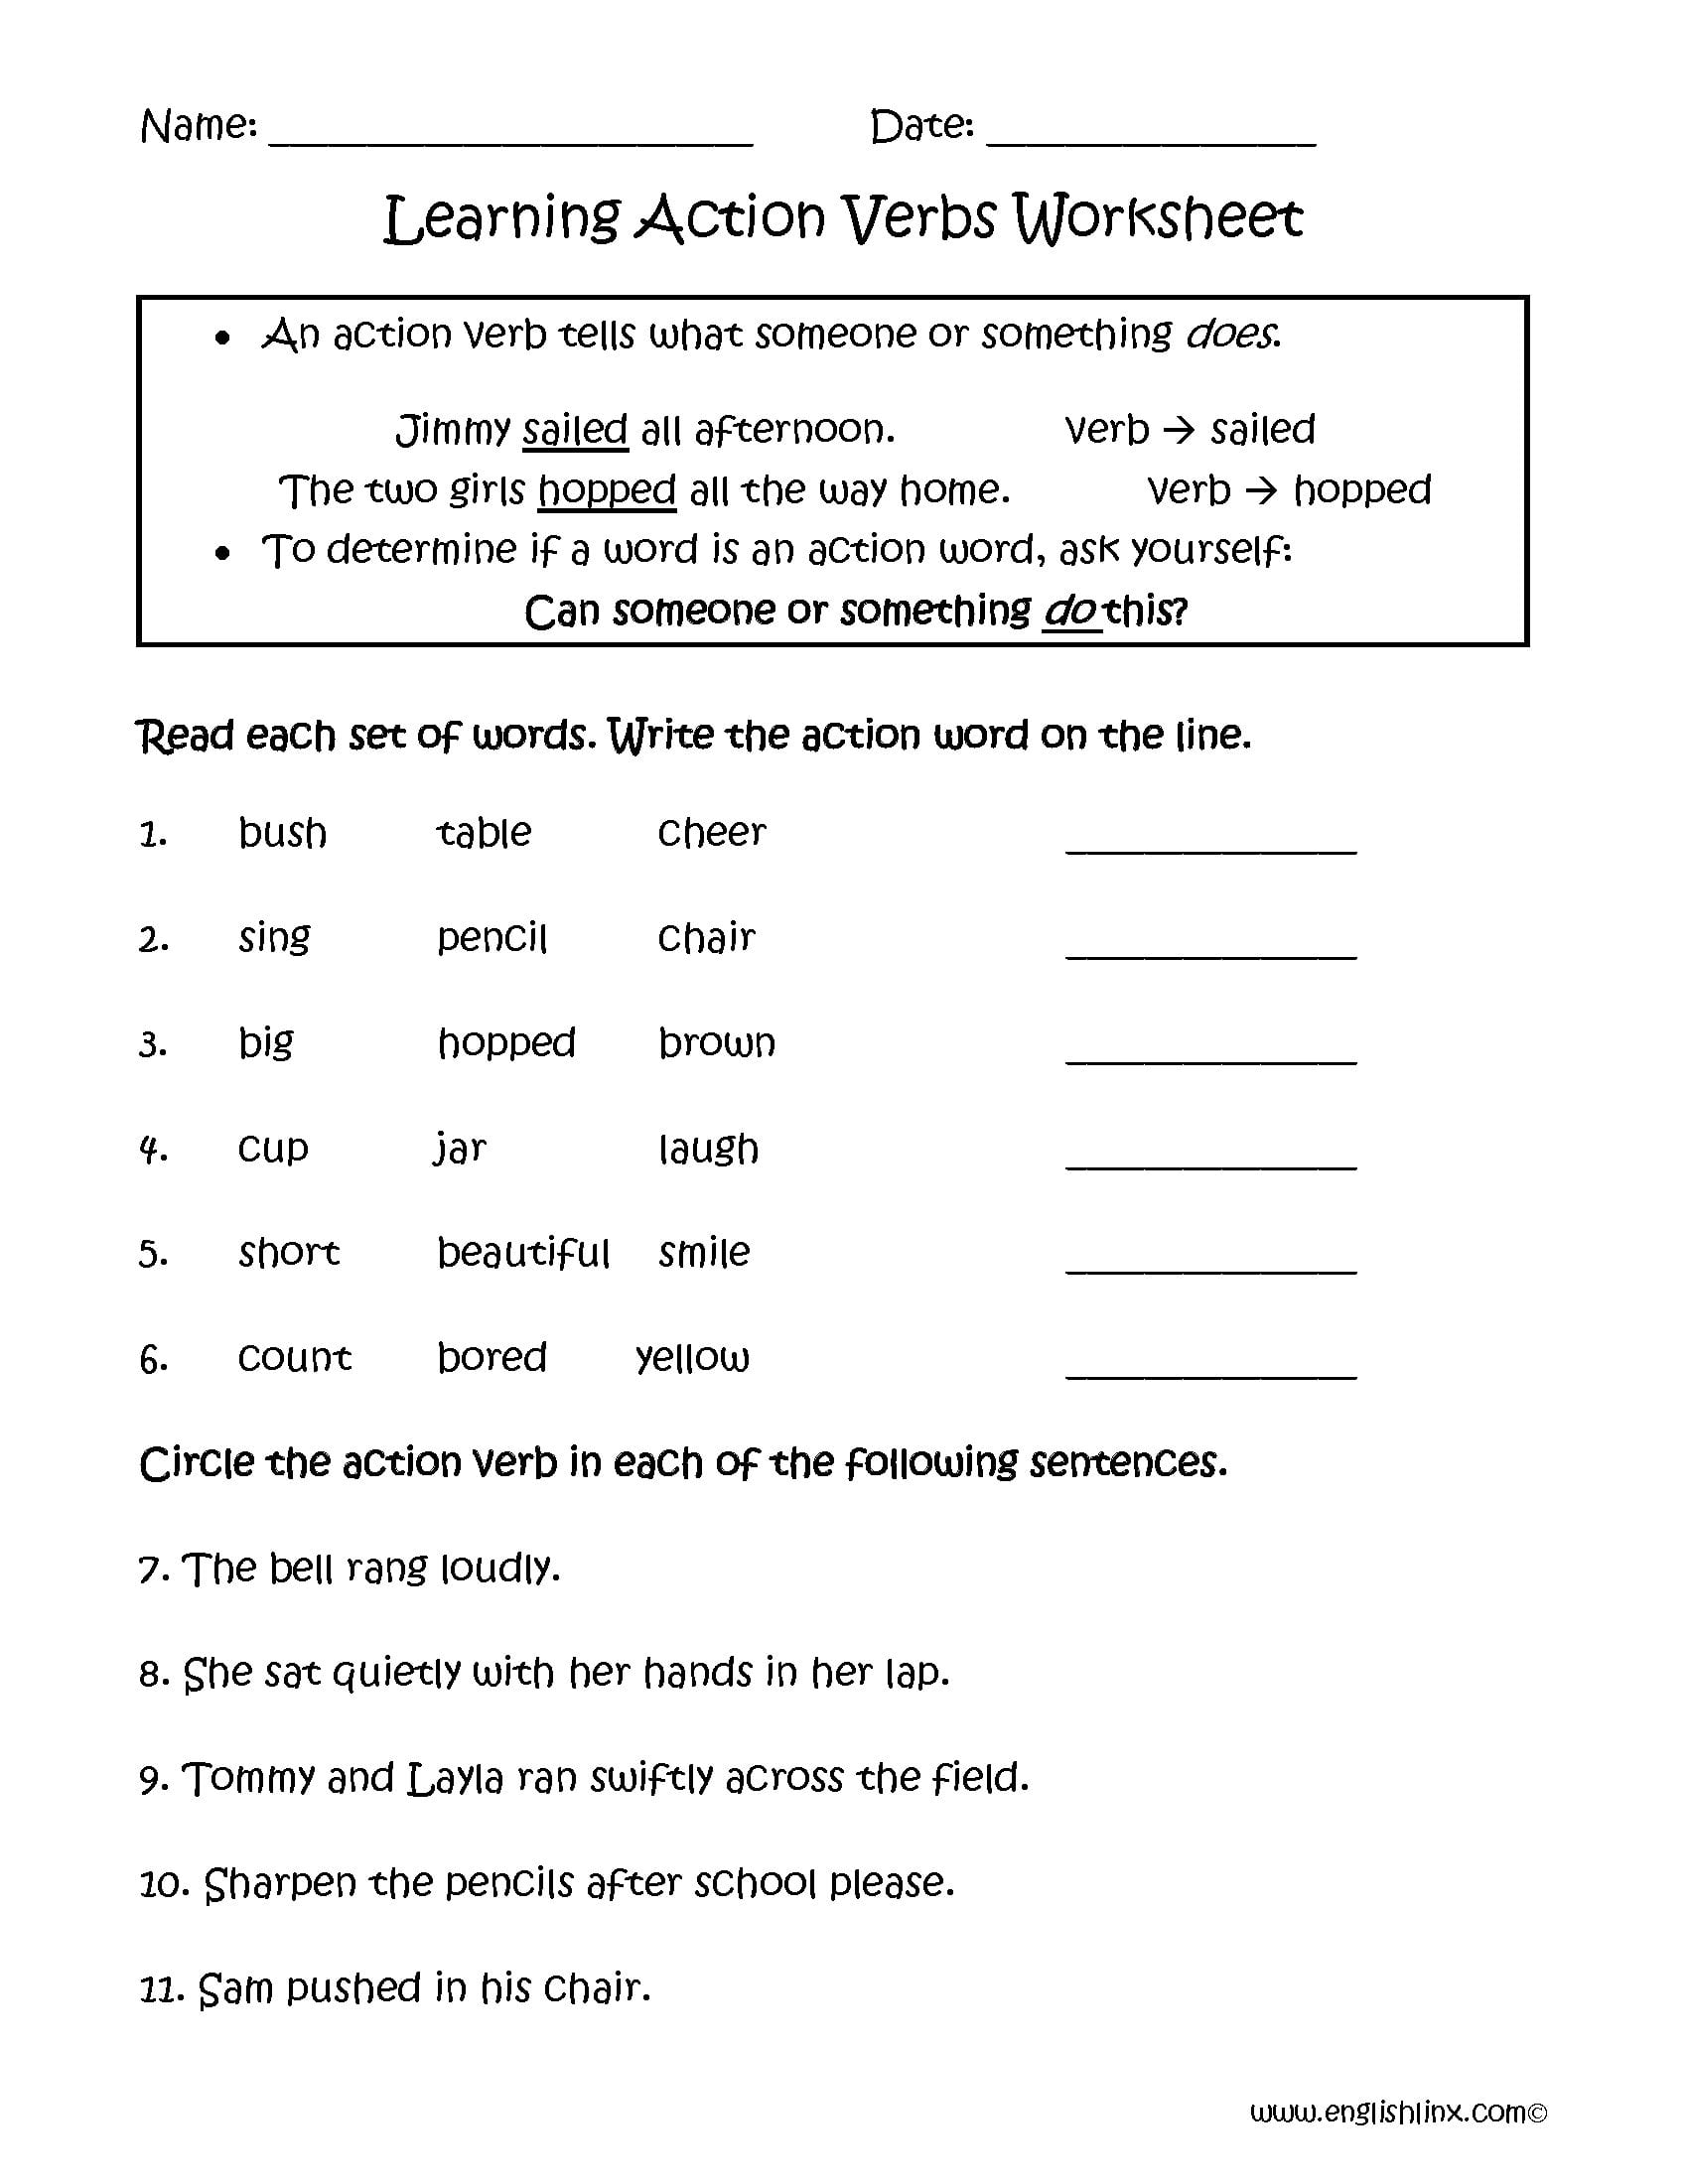 Verbs Worksheets  Action Verbs Worksheets Also Verb To Be Worksheets For Adults Pdf